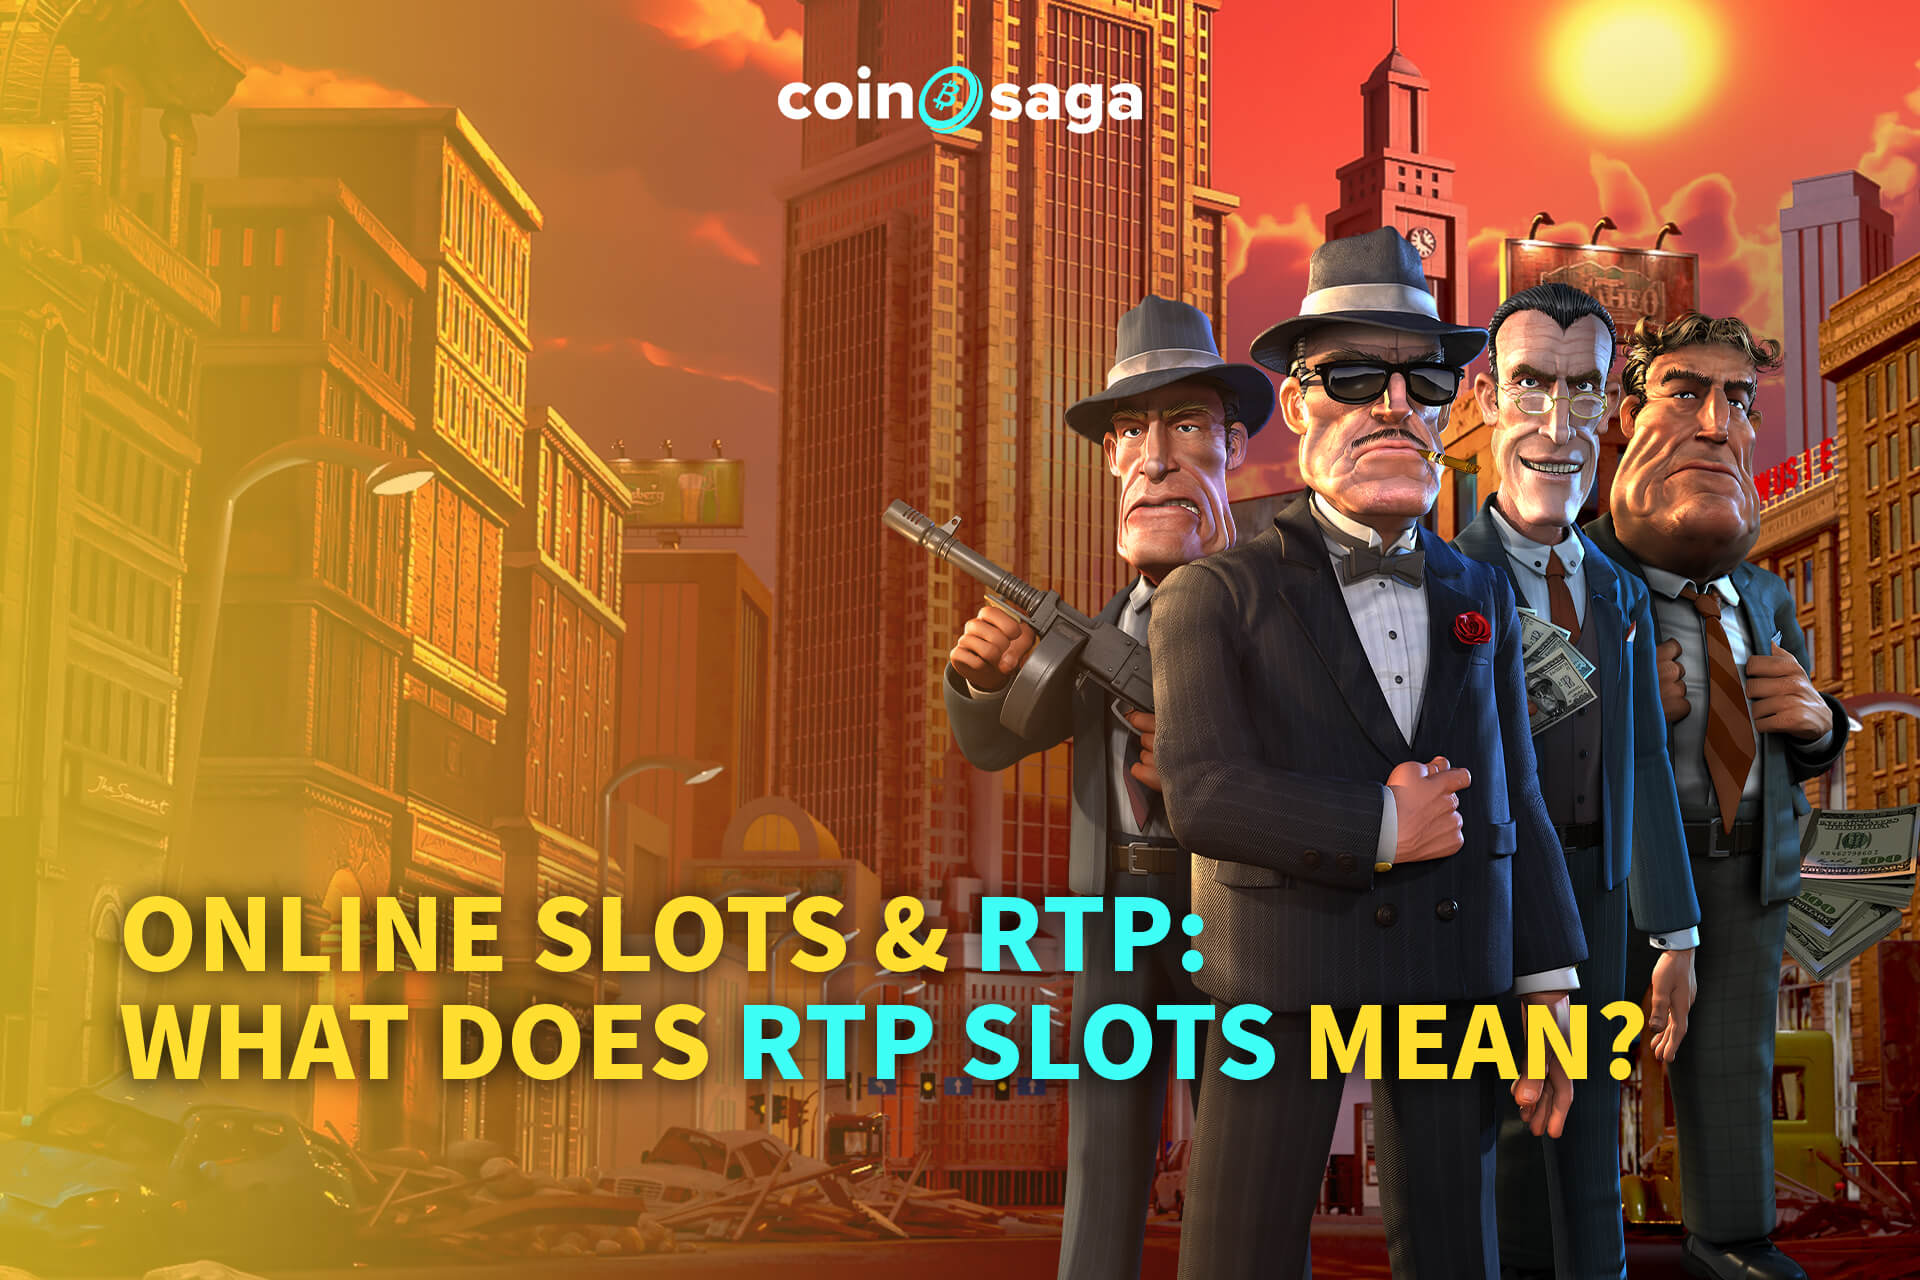 What does RTP Slots mean?